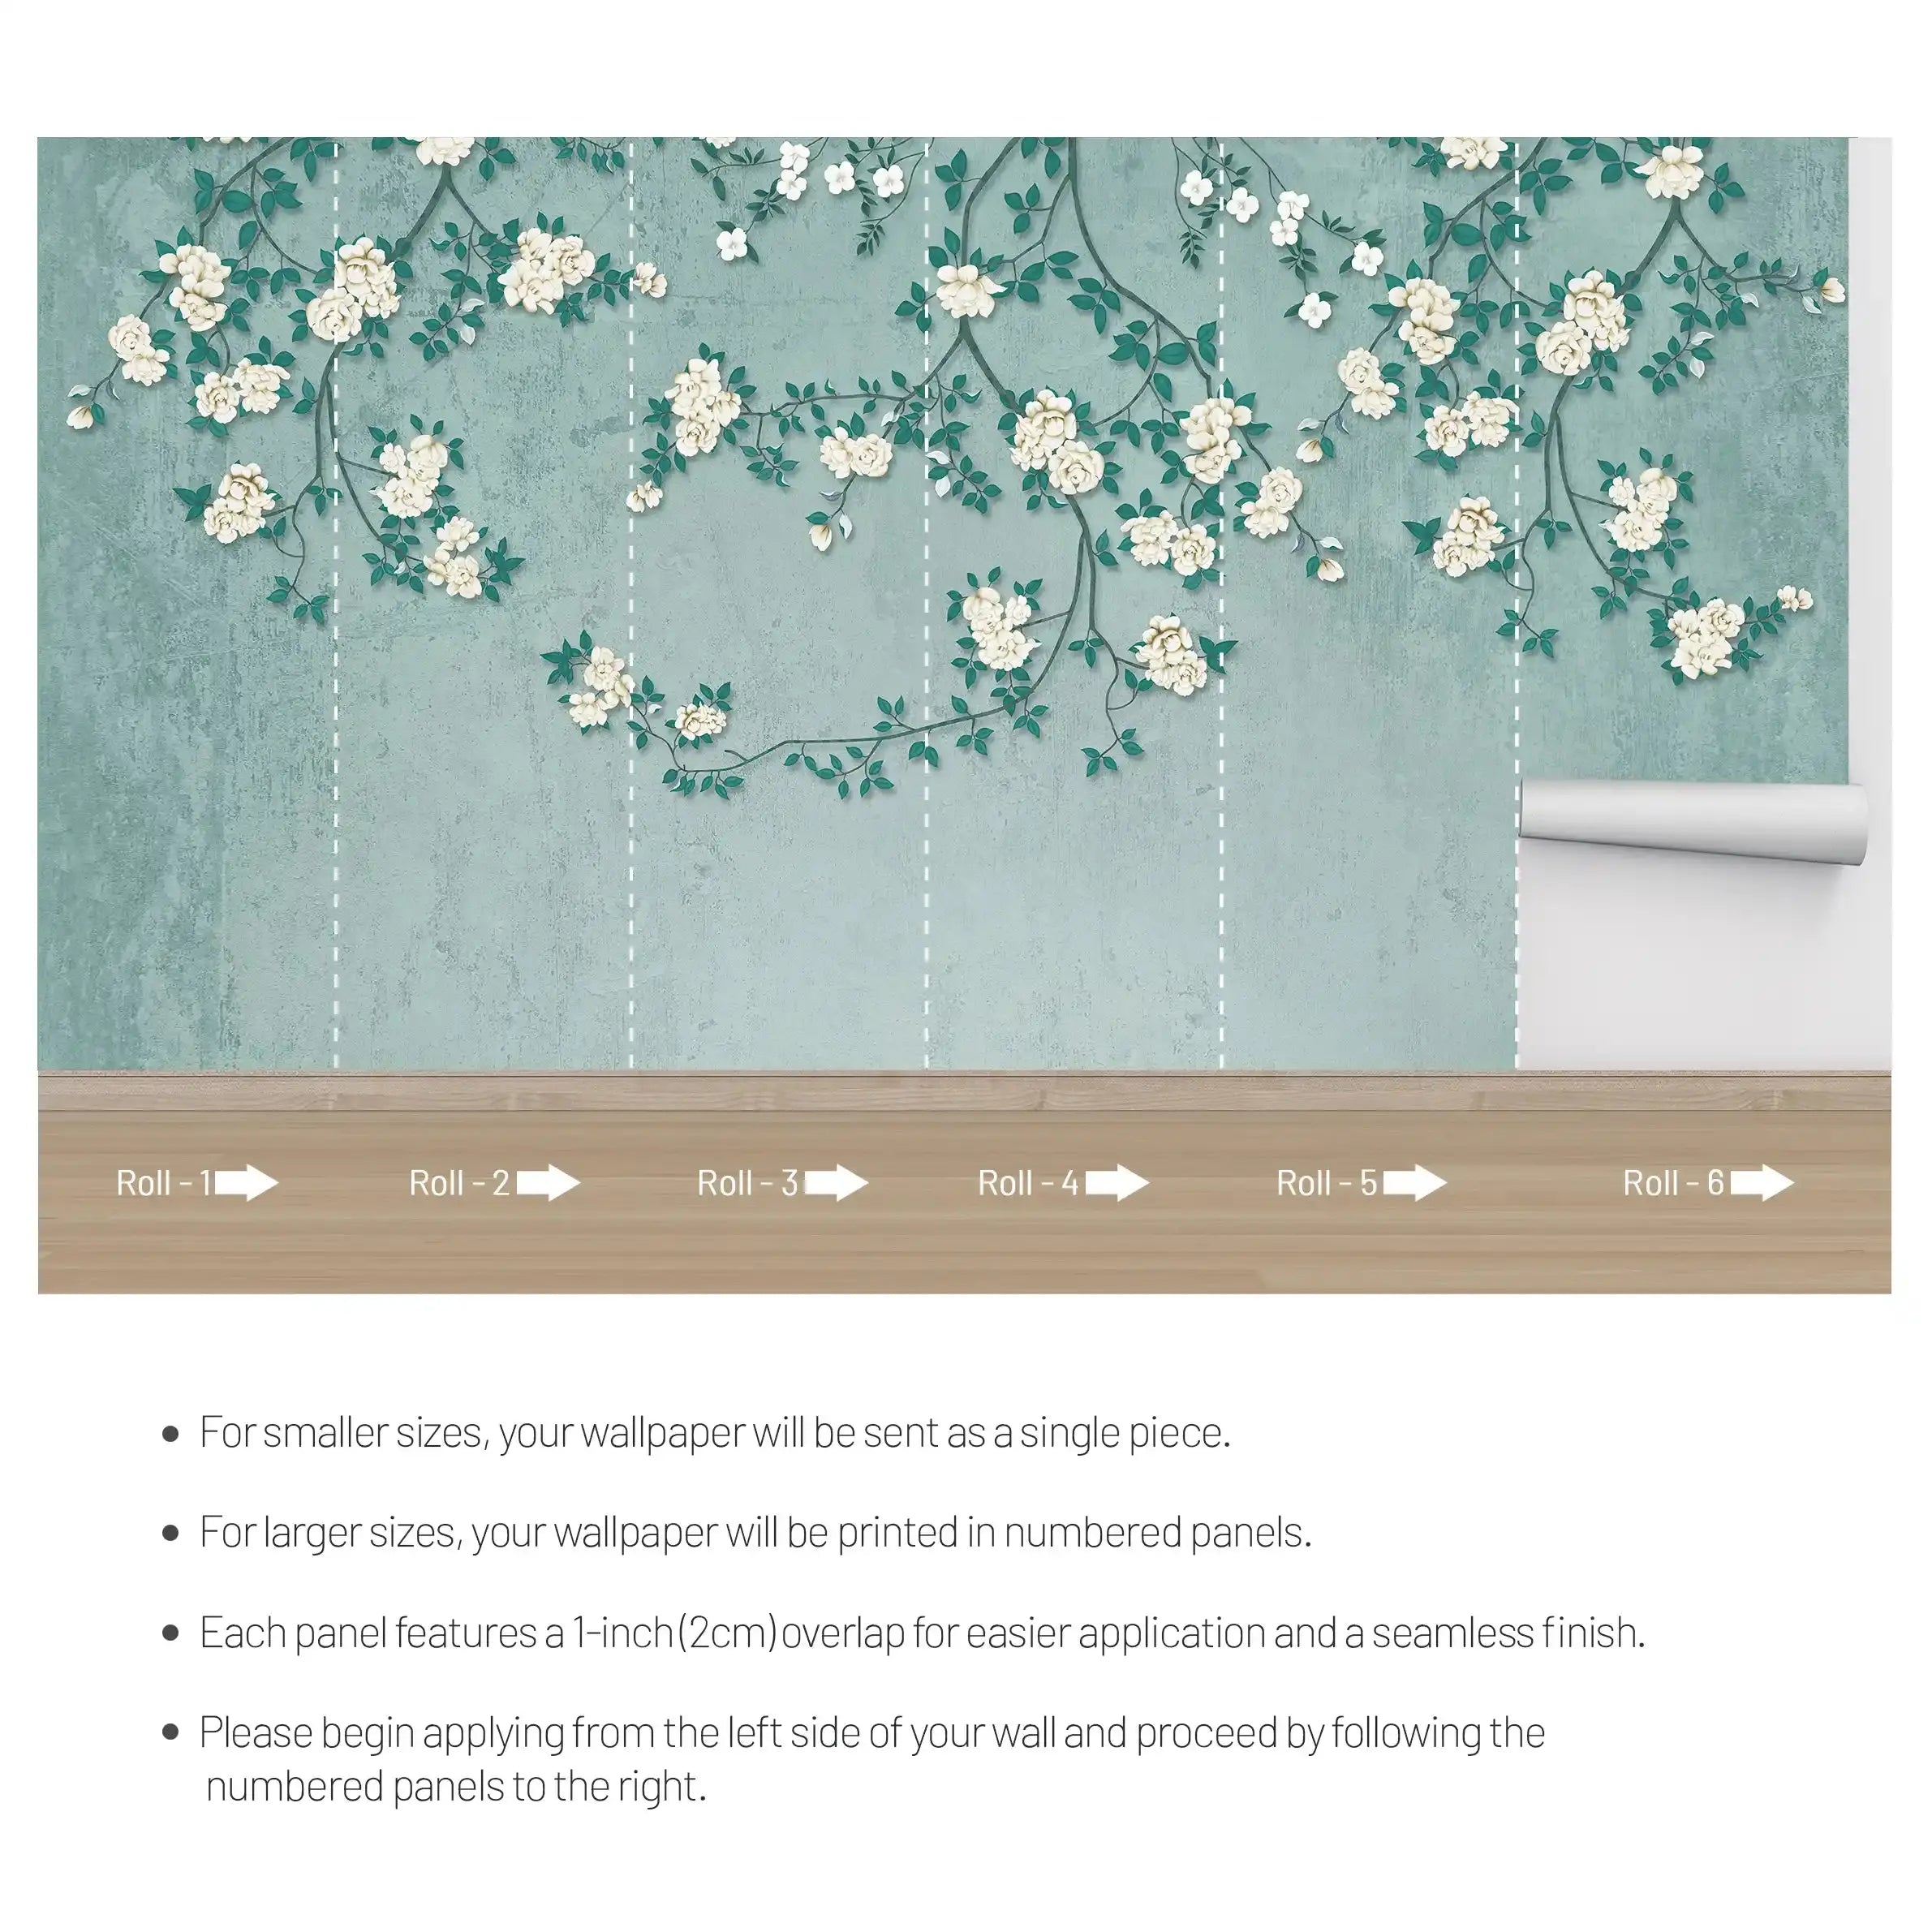 3028-A / Chinese Style Floral Peel and Stick Wallpaper: Easy Install, Adhesive Mural for Walls - Artevella